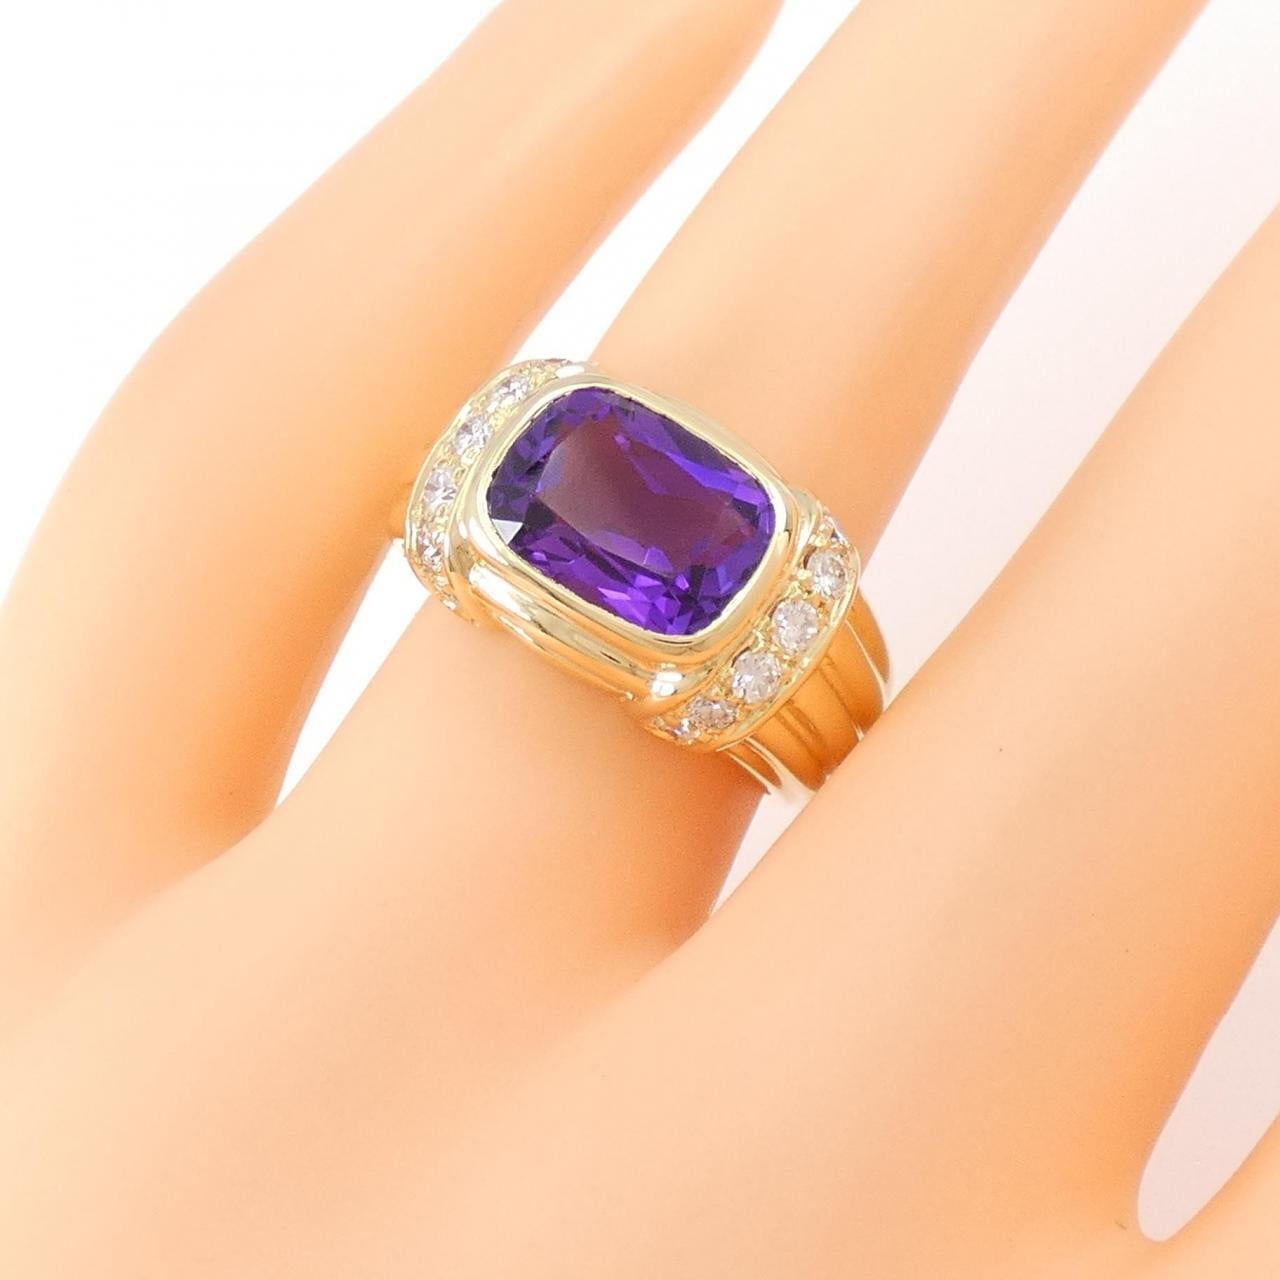 Bvlgari Italy 18k Yellow Gold, Diamond & Amethyst Cocktail Ring Vintage Circa 1980s

Here is your chance to purchase a beautiful and highly collectible designer cocktail ring. 